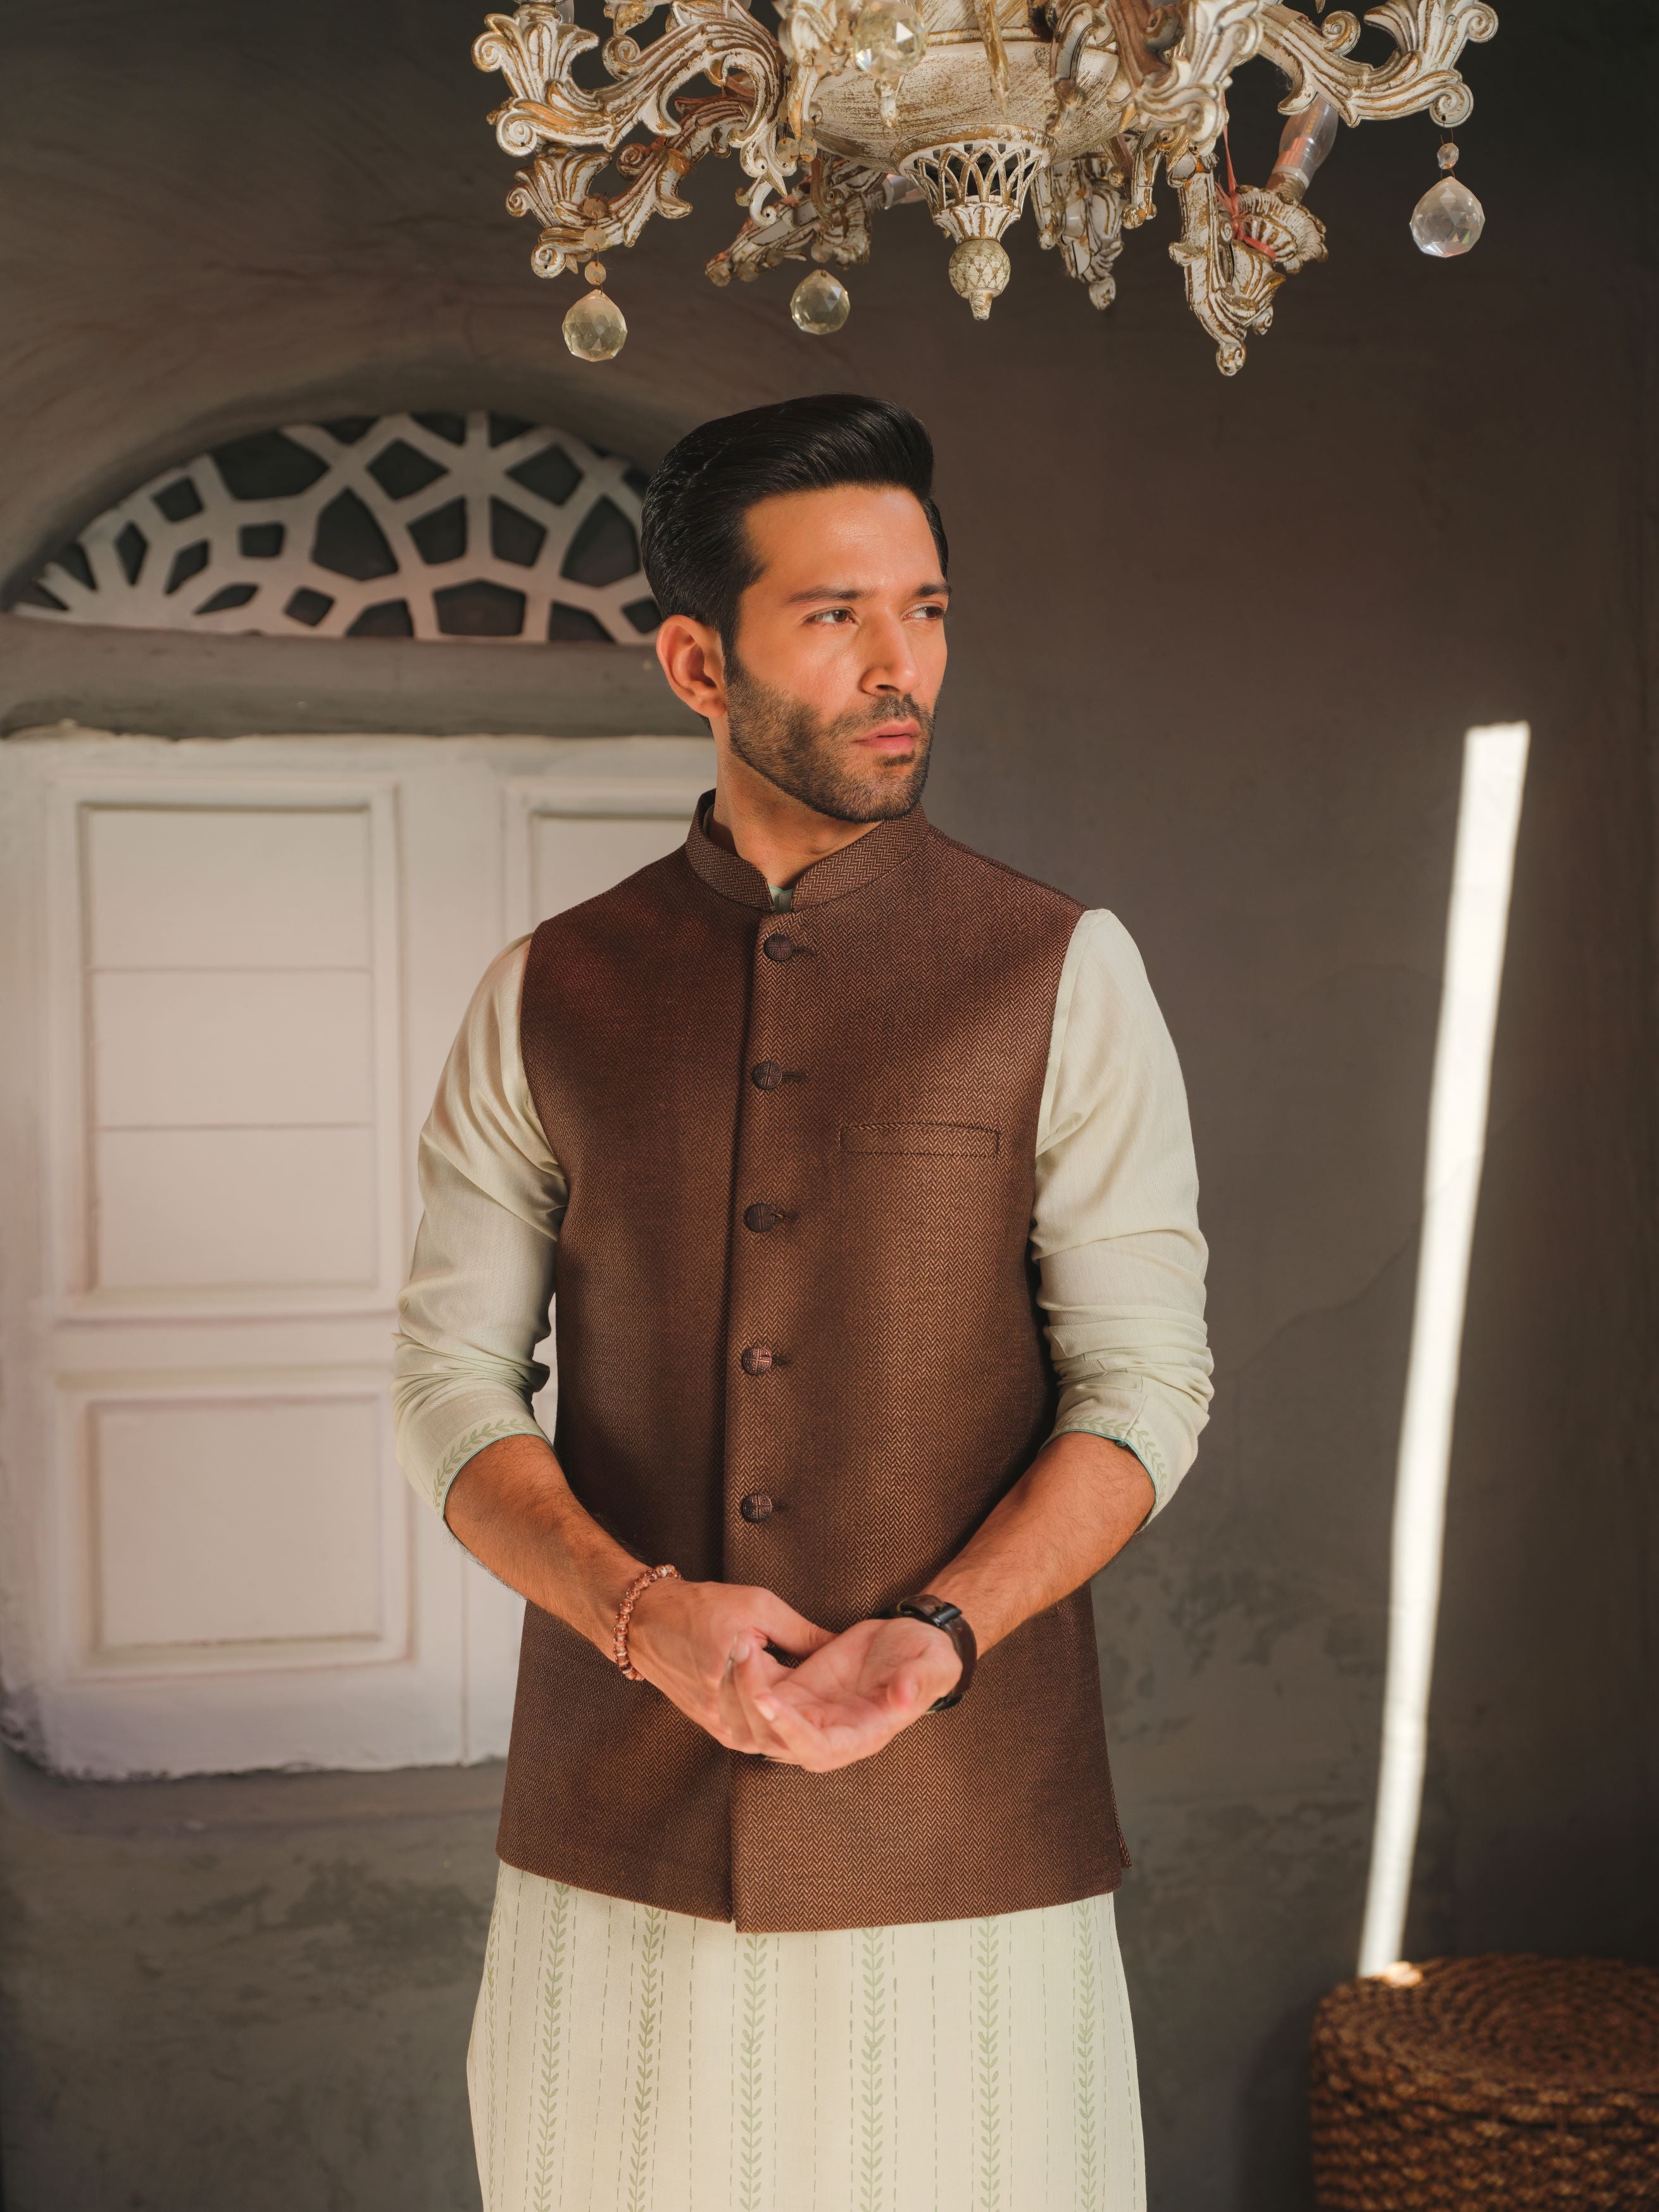 A truly elegant and sophisticated addition to your Eastern wear wardrobe. Shaffer's waistcoats are crafted with the utmost care and attention to detail, using only the finest materials to ensure a luxurious look and feel.